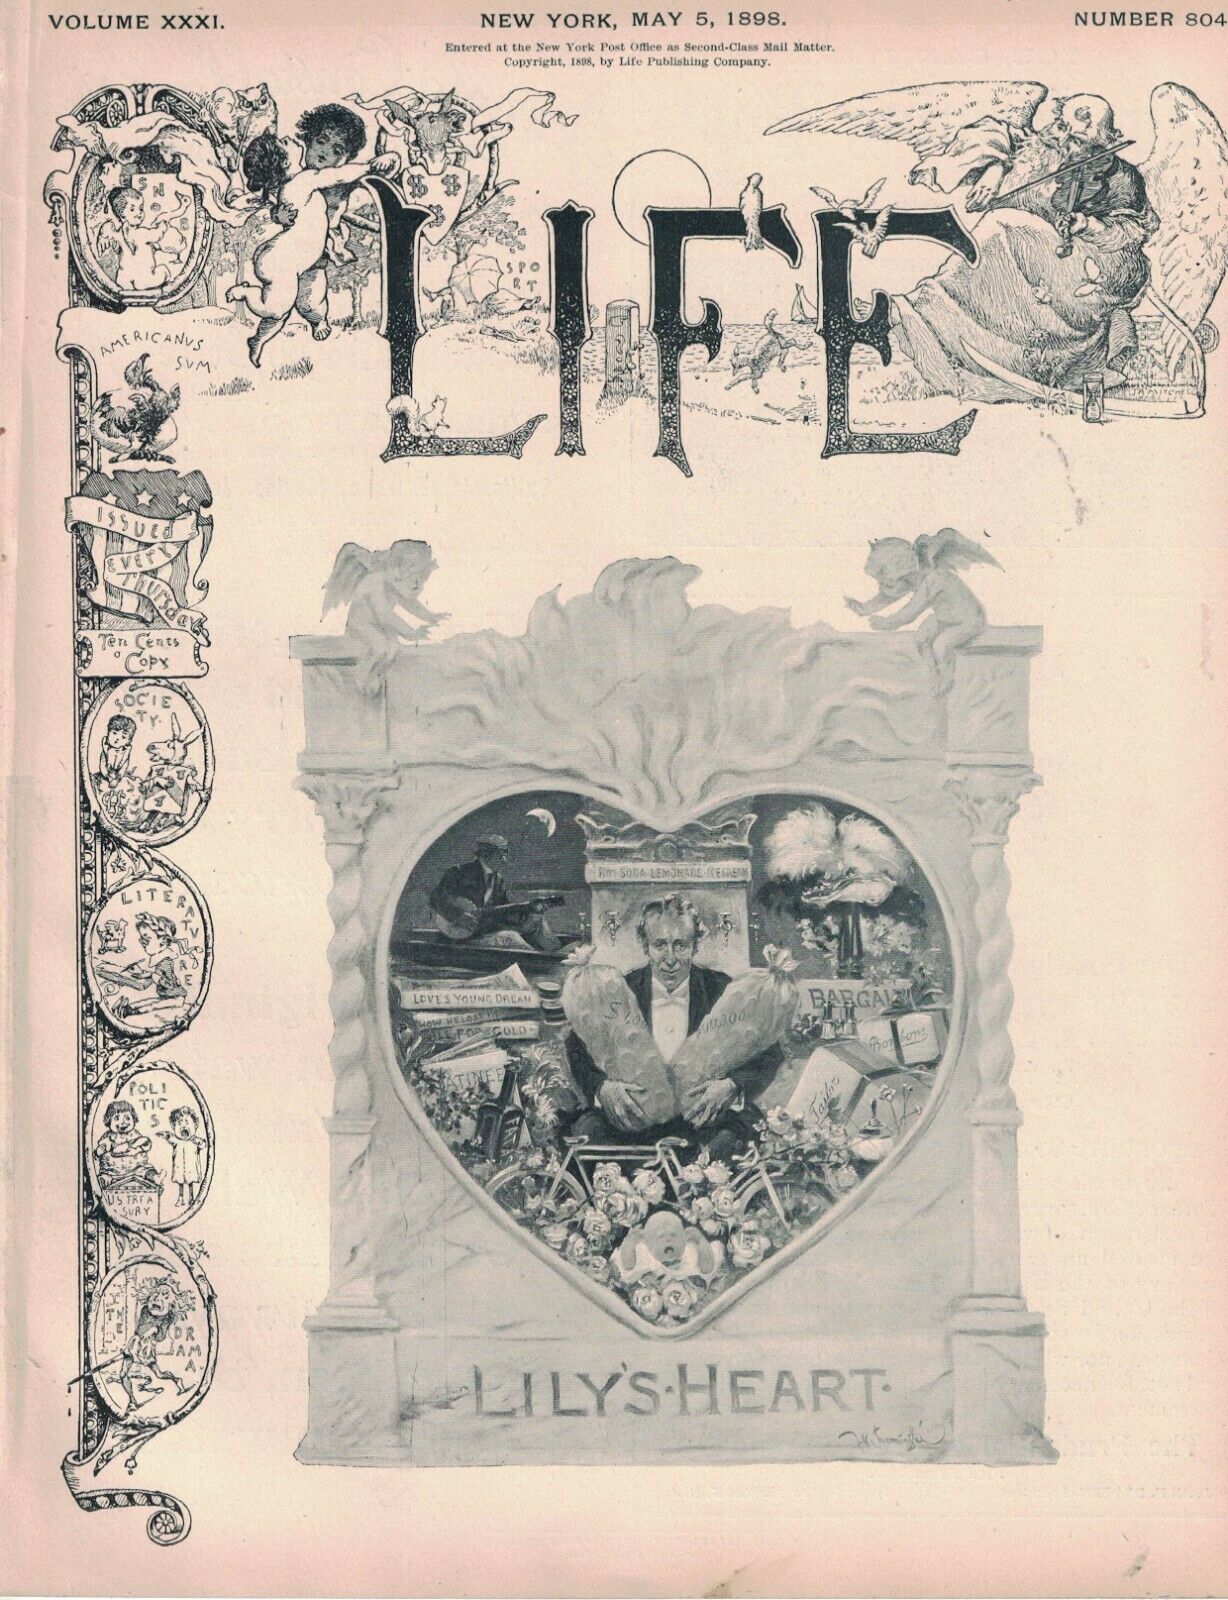 1898 Life May 5 - America goes to war; Teddy will quit post and enlist; Sagasta